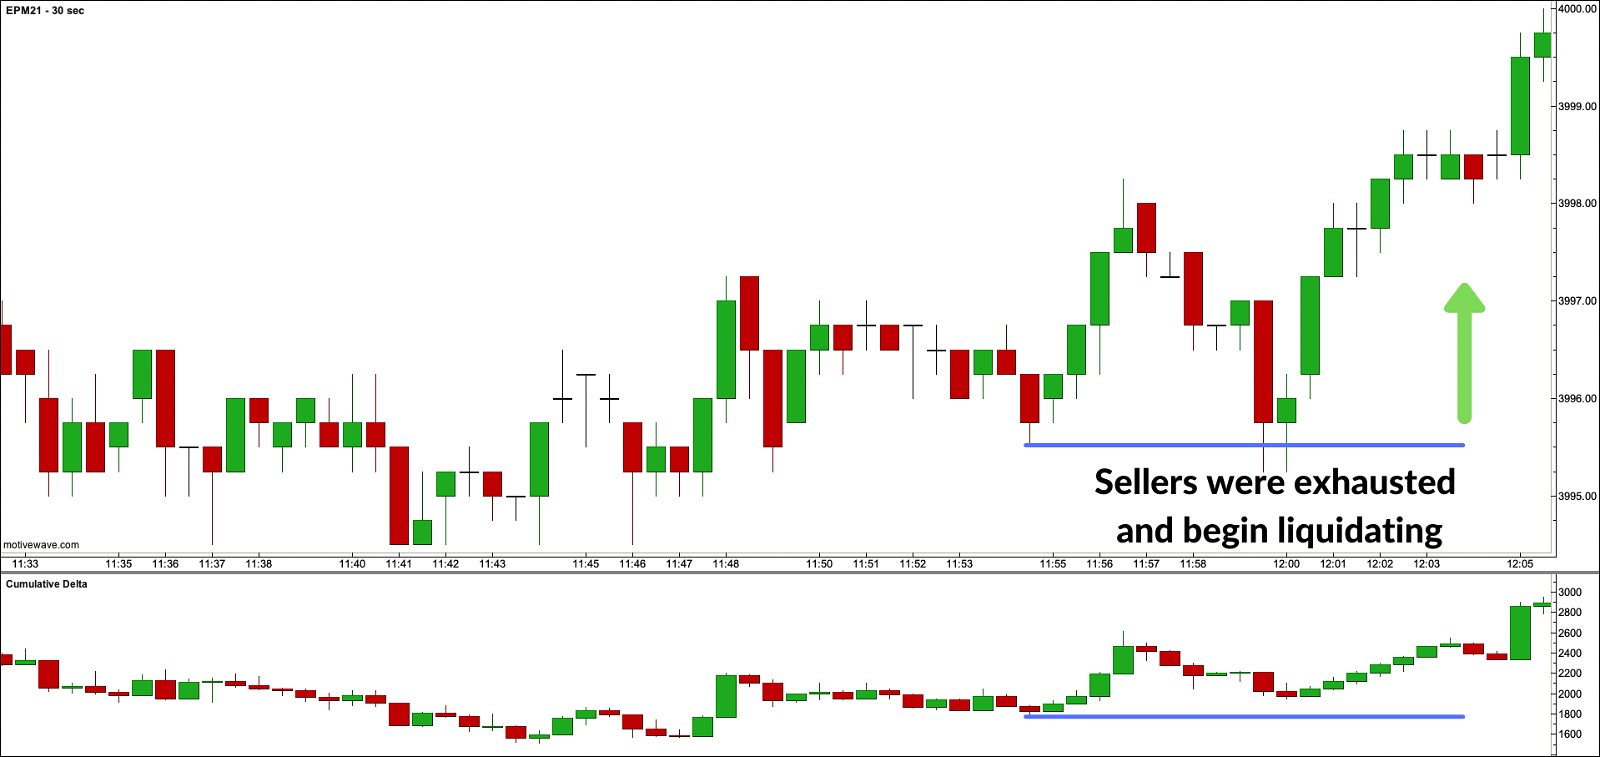 30 Second Candlestick Chart of Exhaustion